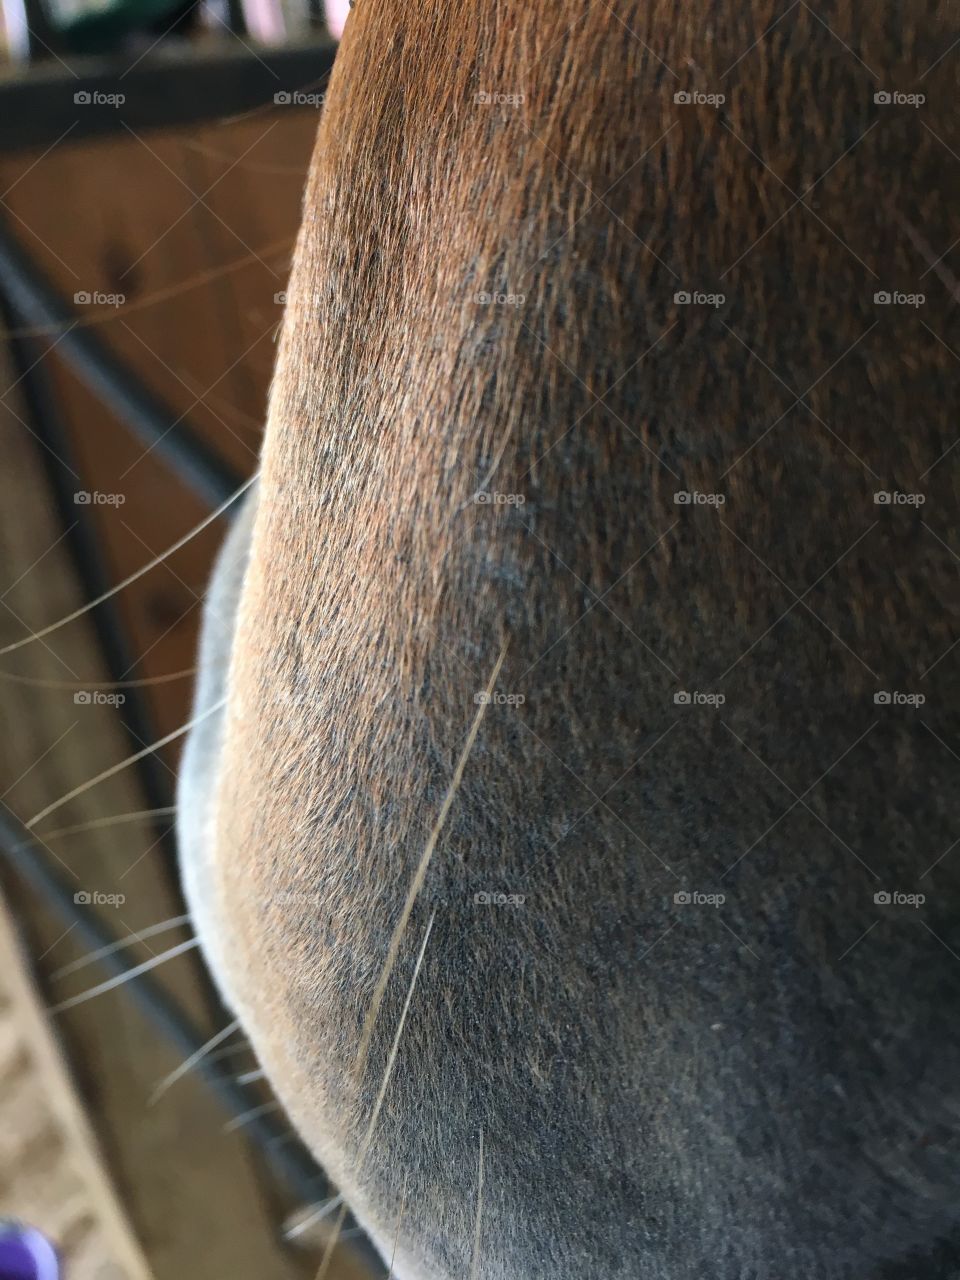 A horse’s nose from up close